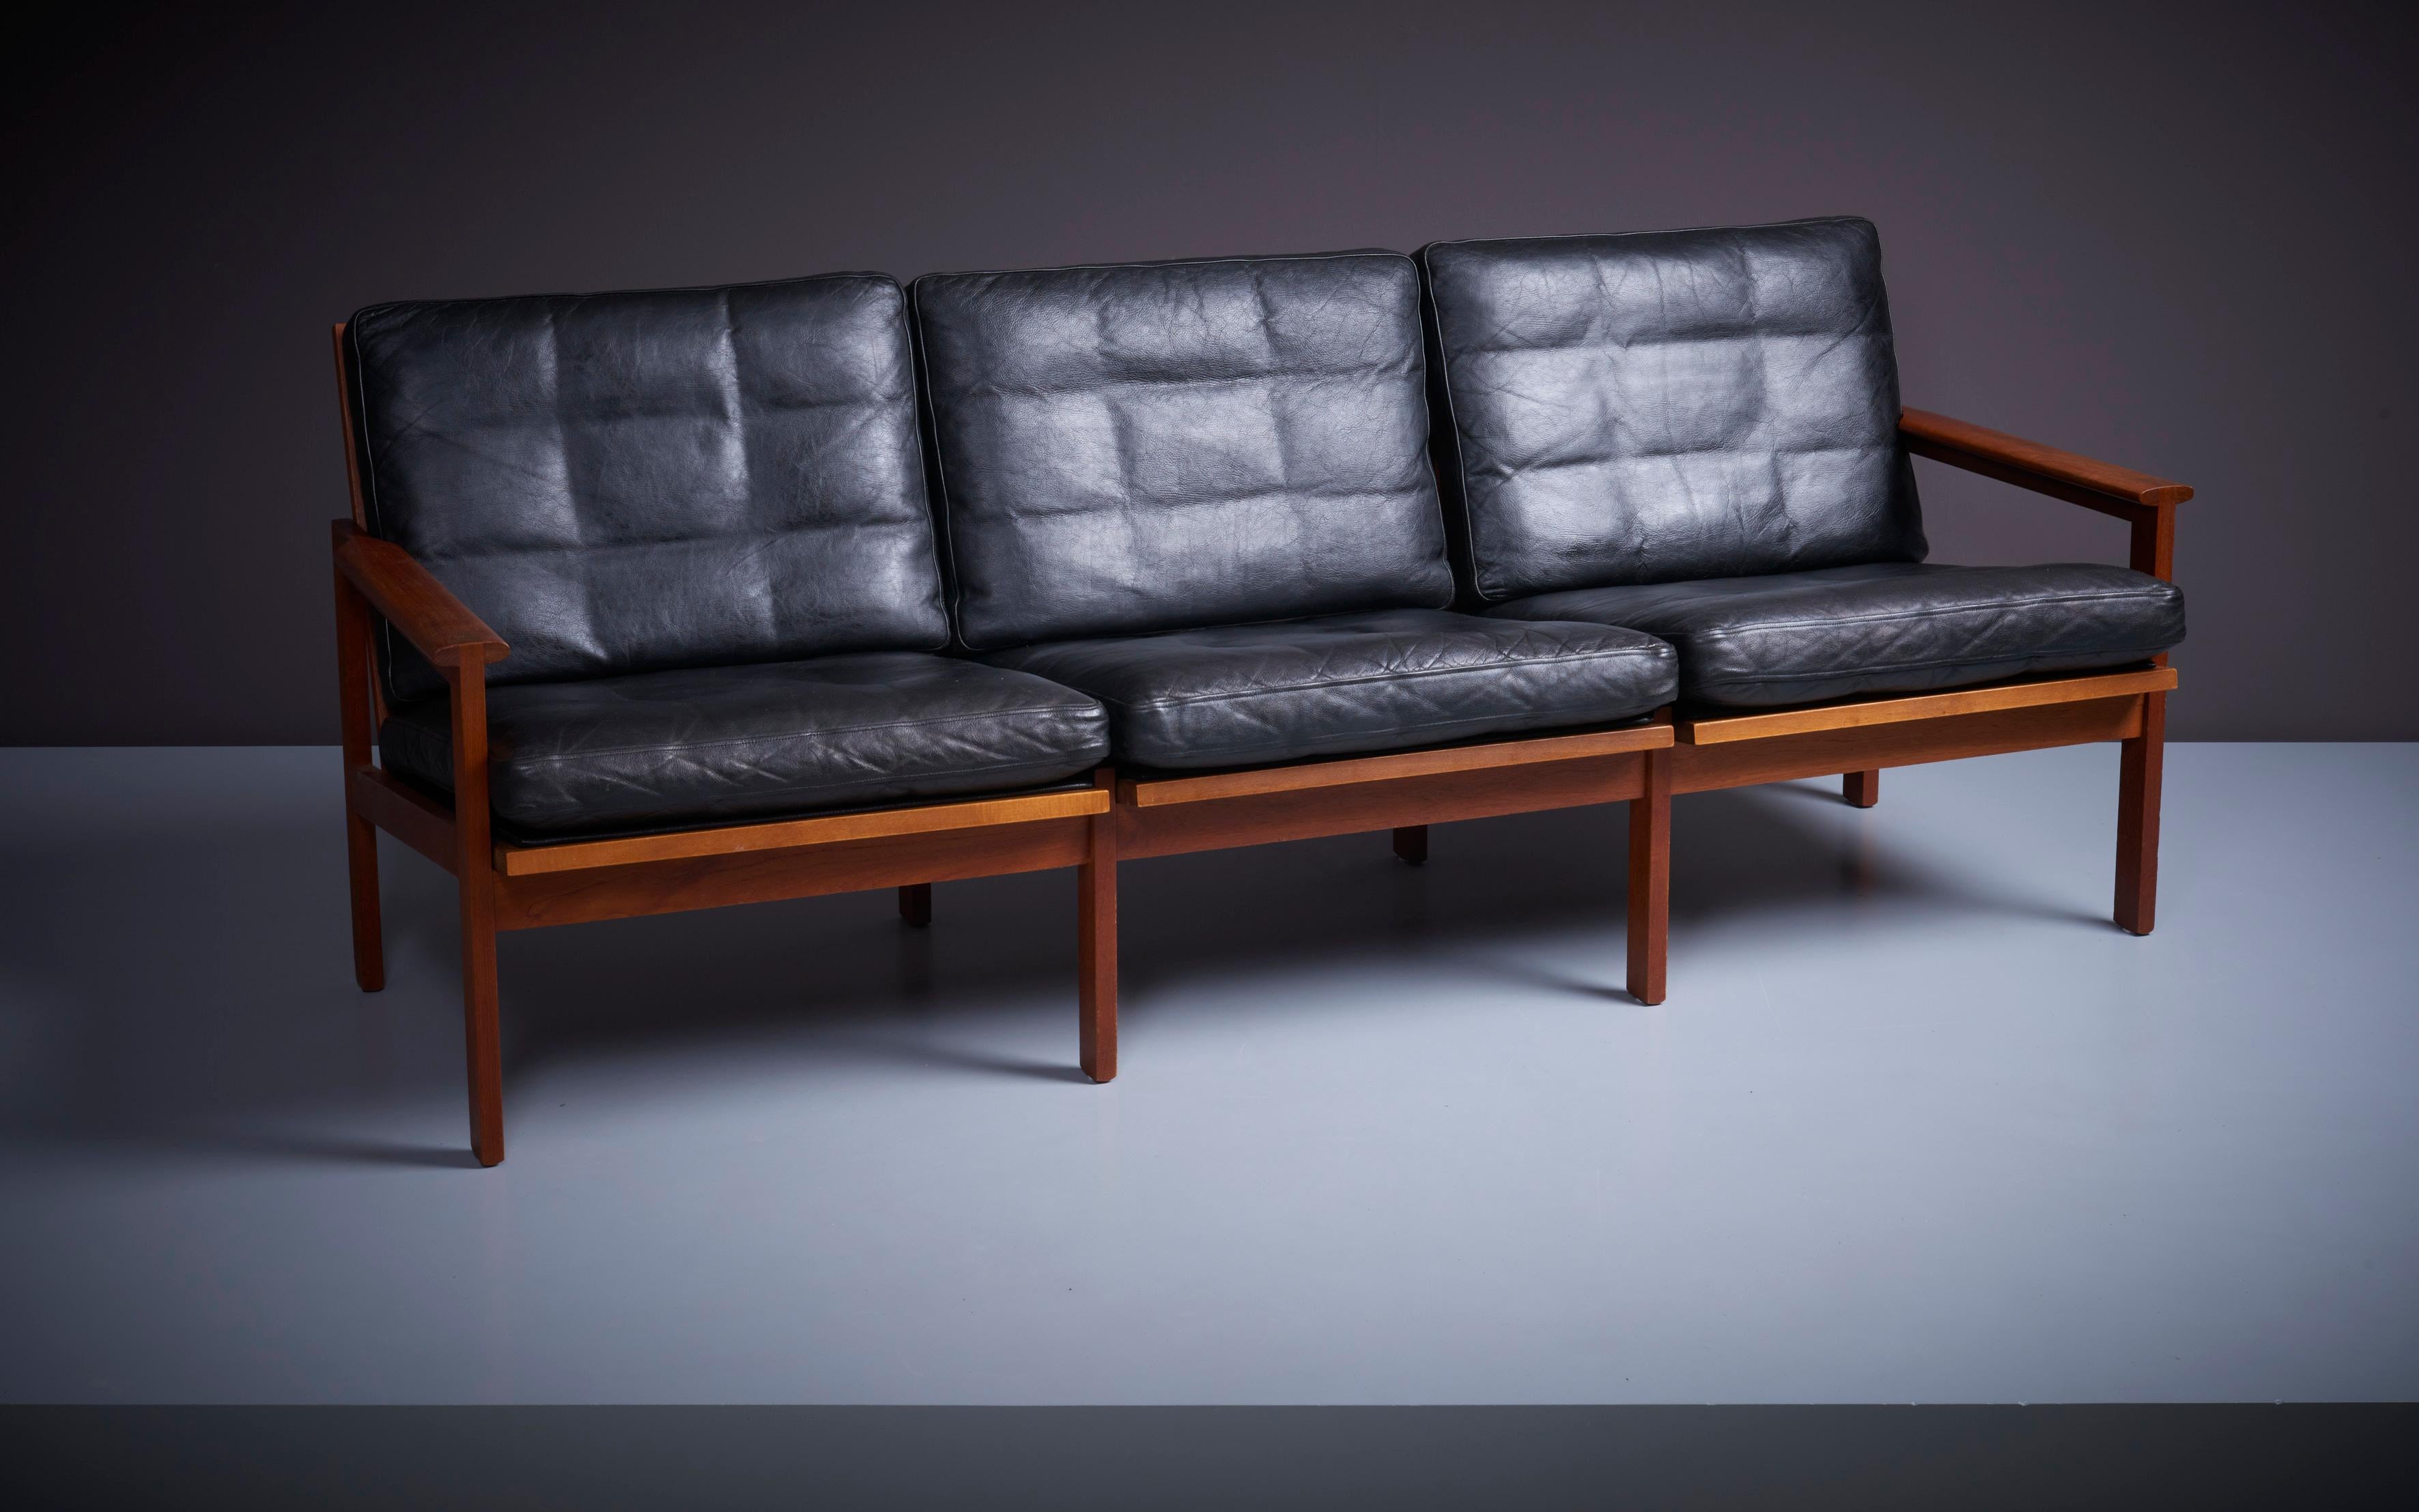 Illum Wikkelso 'Capella' Set of 2x Black Leather Sofa & Side Table Denmark 1960s For Sale 3